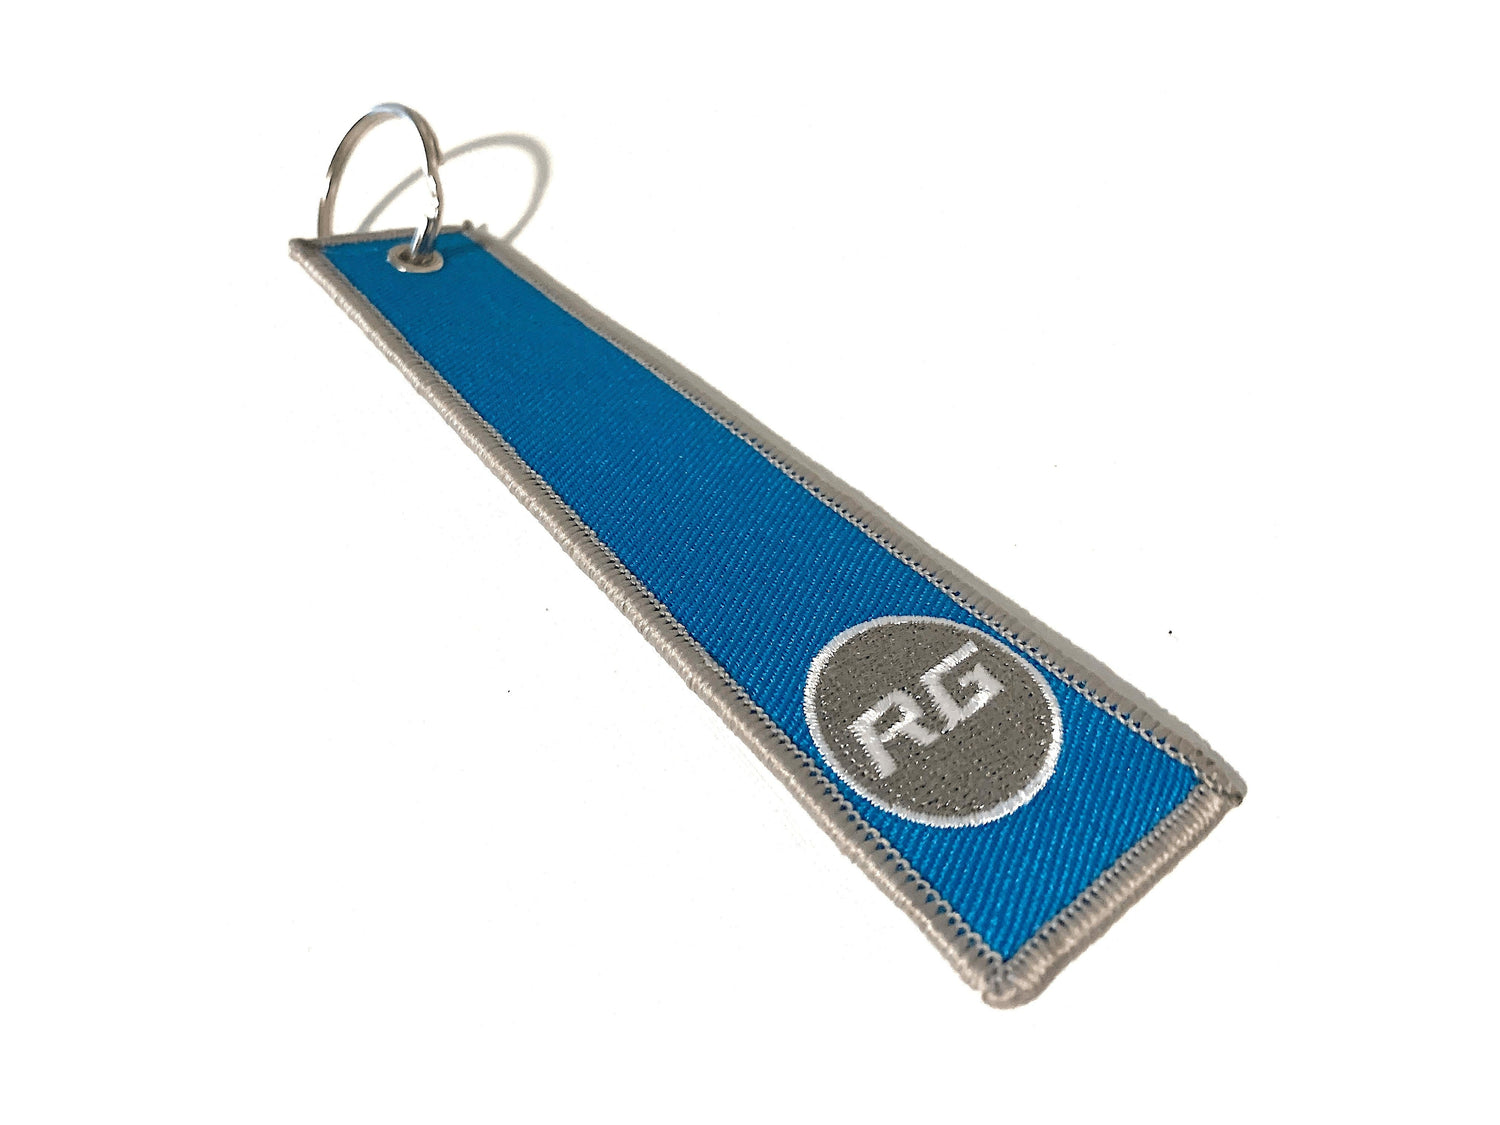 Push The Limit 350z Key Tag - Rico's Garage - Custom Decals, Banners and more!